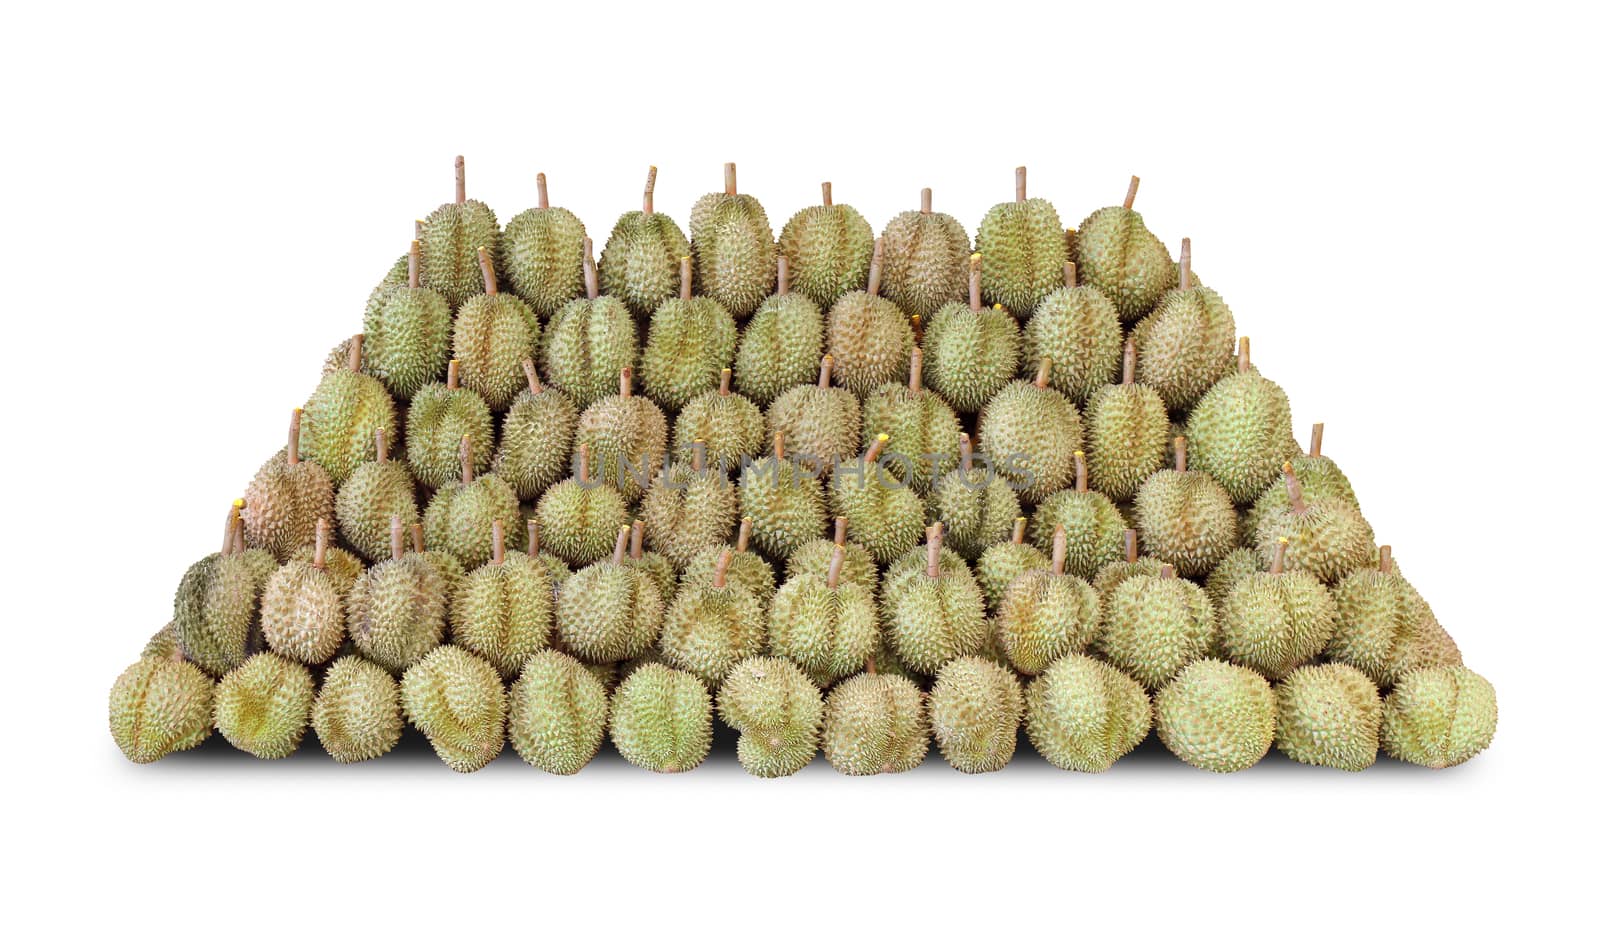 Pile of Durian, Durian fruit heap for sale, Durian is king of fruits southeast Thailand, Durian many on white background by cgdeaw